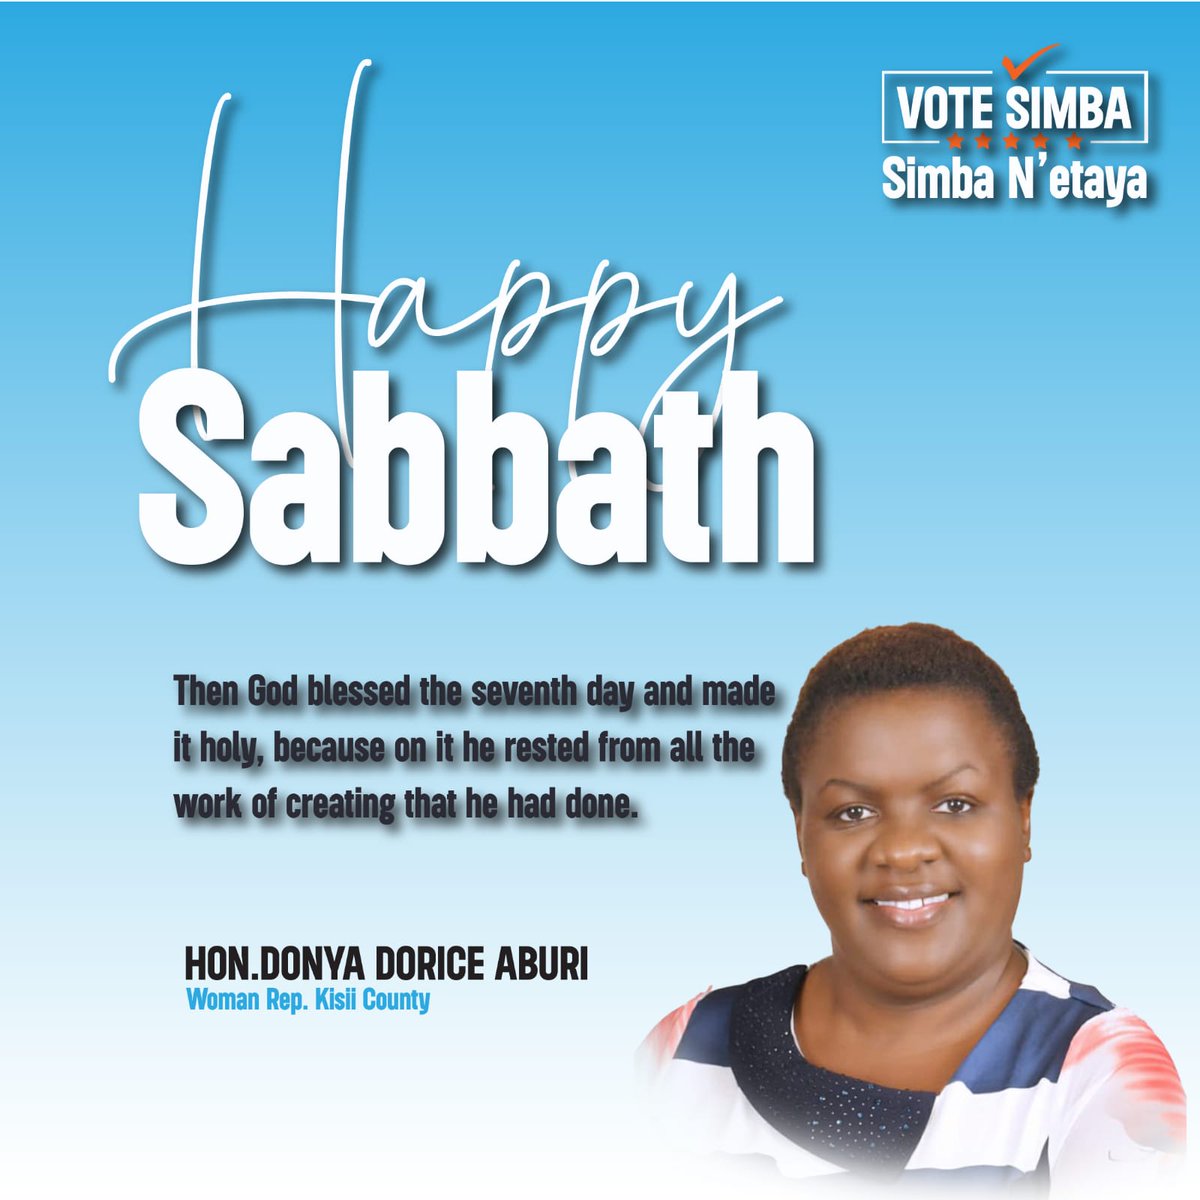 Sabbath isn't about resting perfectly; it's about resting in the One who is perfect. Happy Sabbath to you all. #HappySabbath